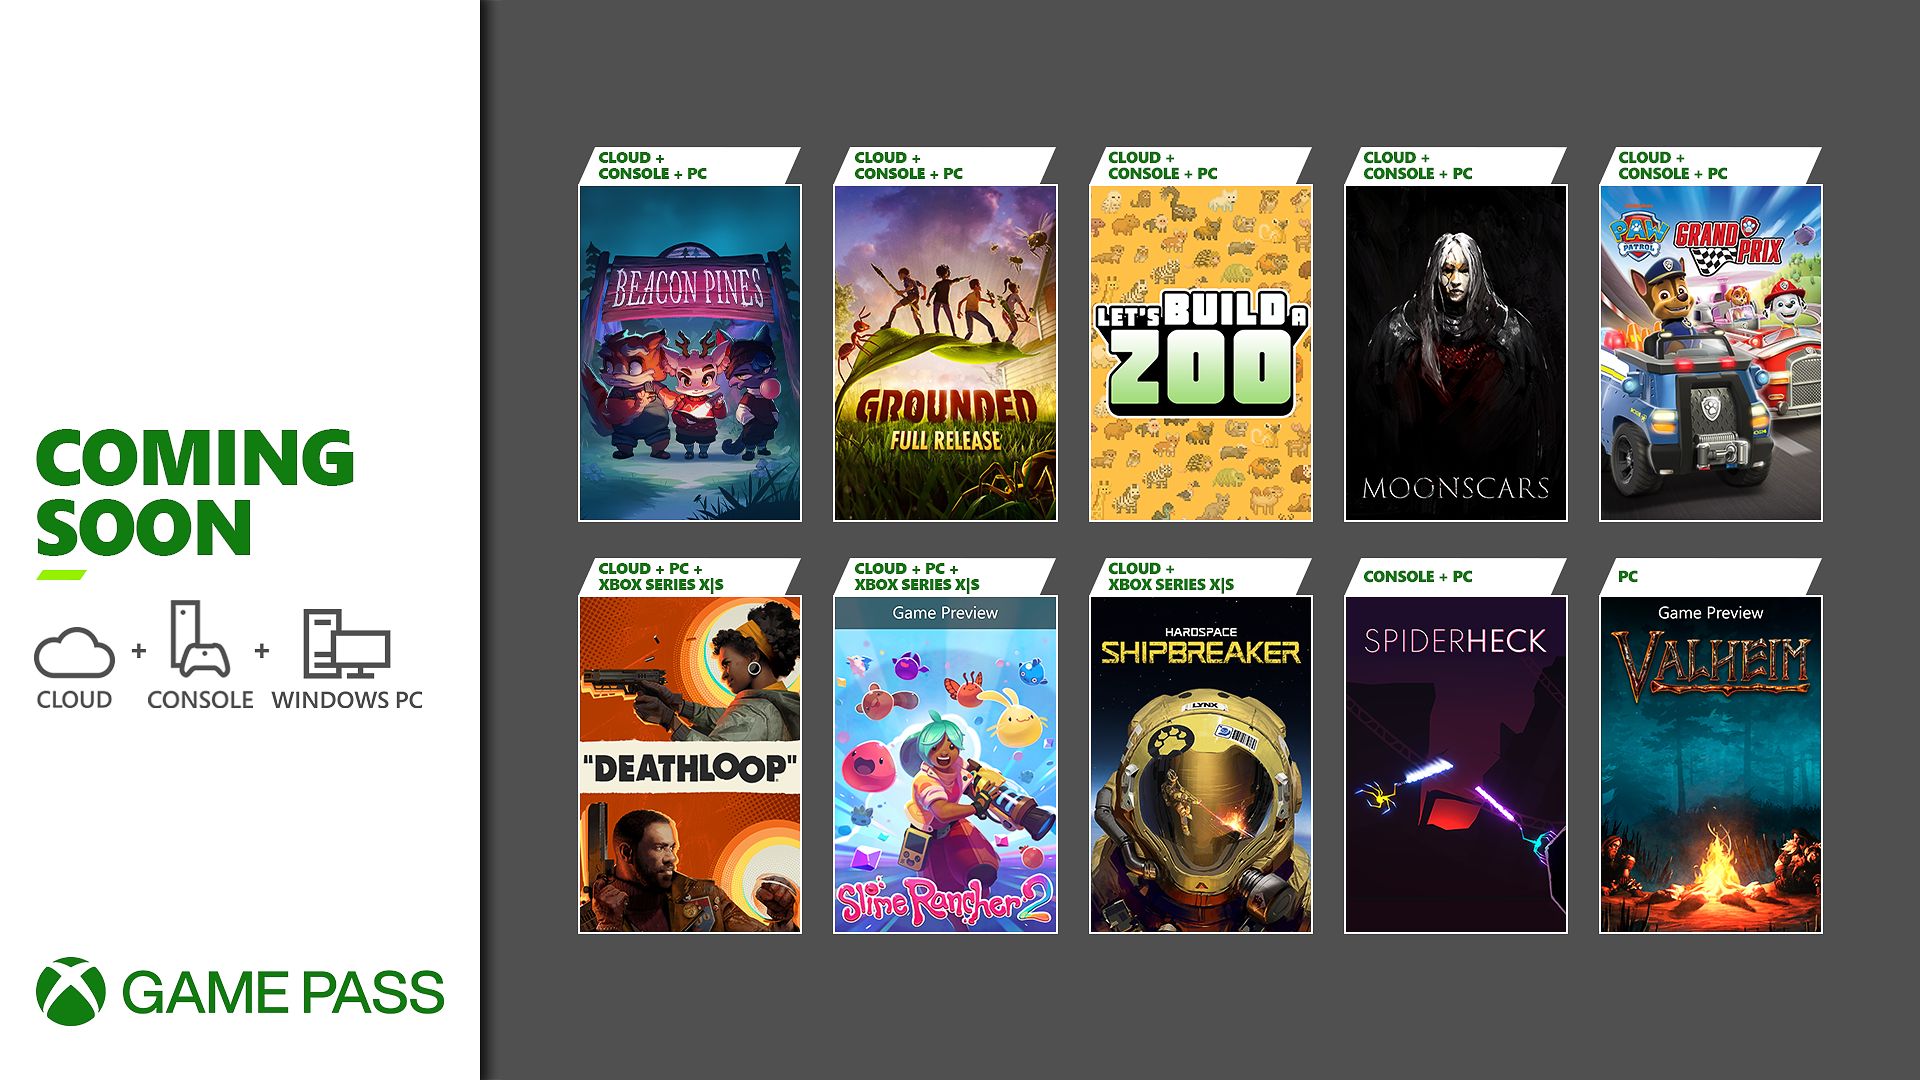 New Xbox Game Pass titles for console, PC and Cloud have been